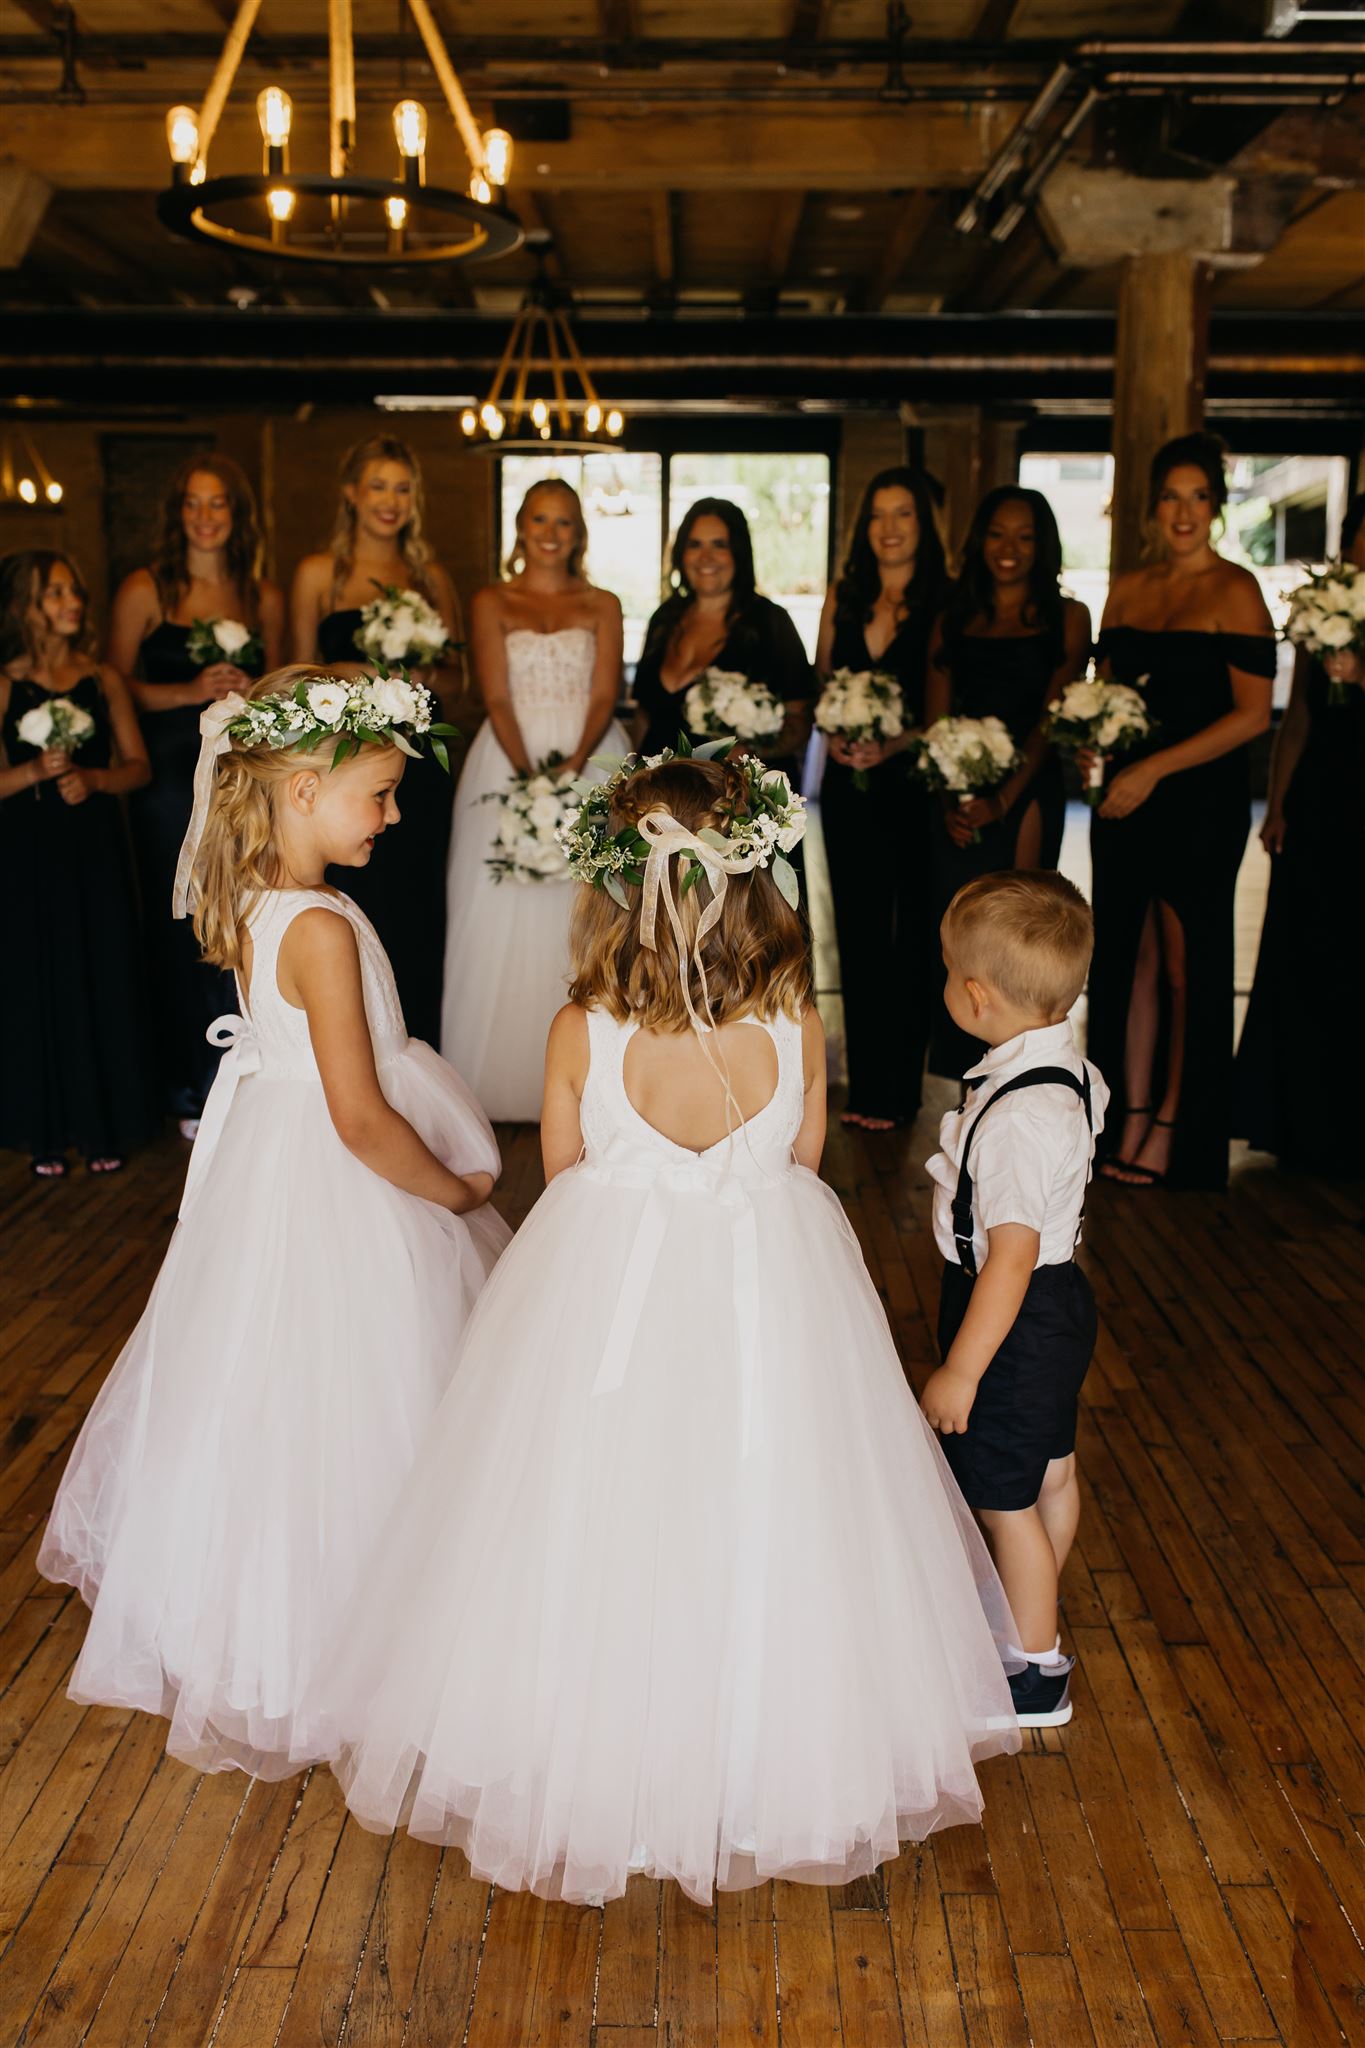 The flower girls and the ring bearer surprised the bride and her bridesmaids